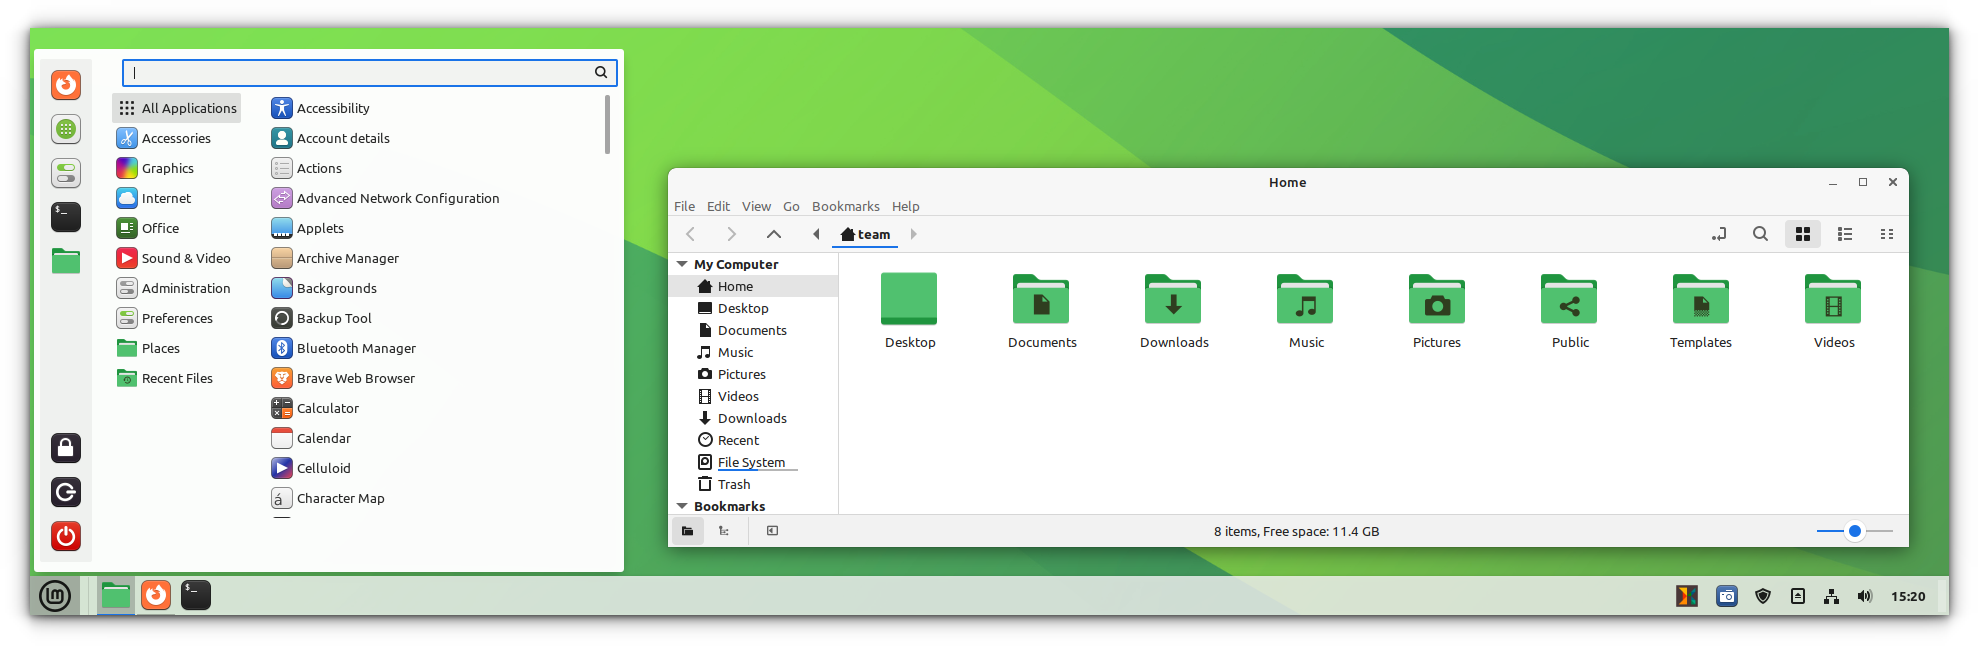 The Fluent Round Light theme is applied to the Cinnamon; both desktop and application themes.